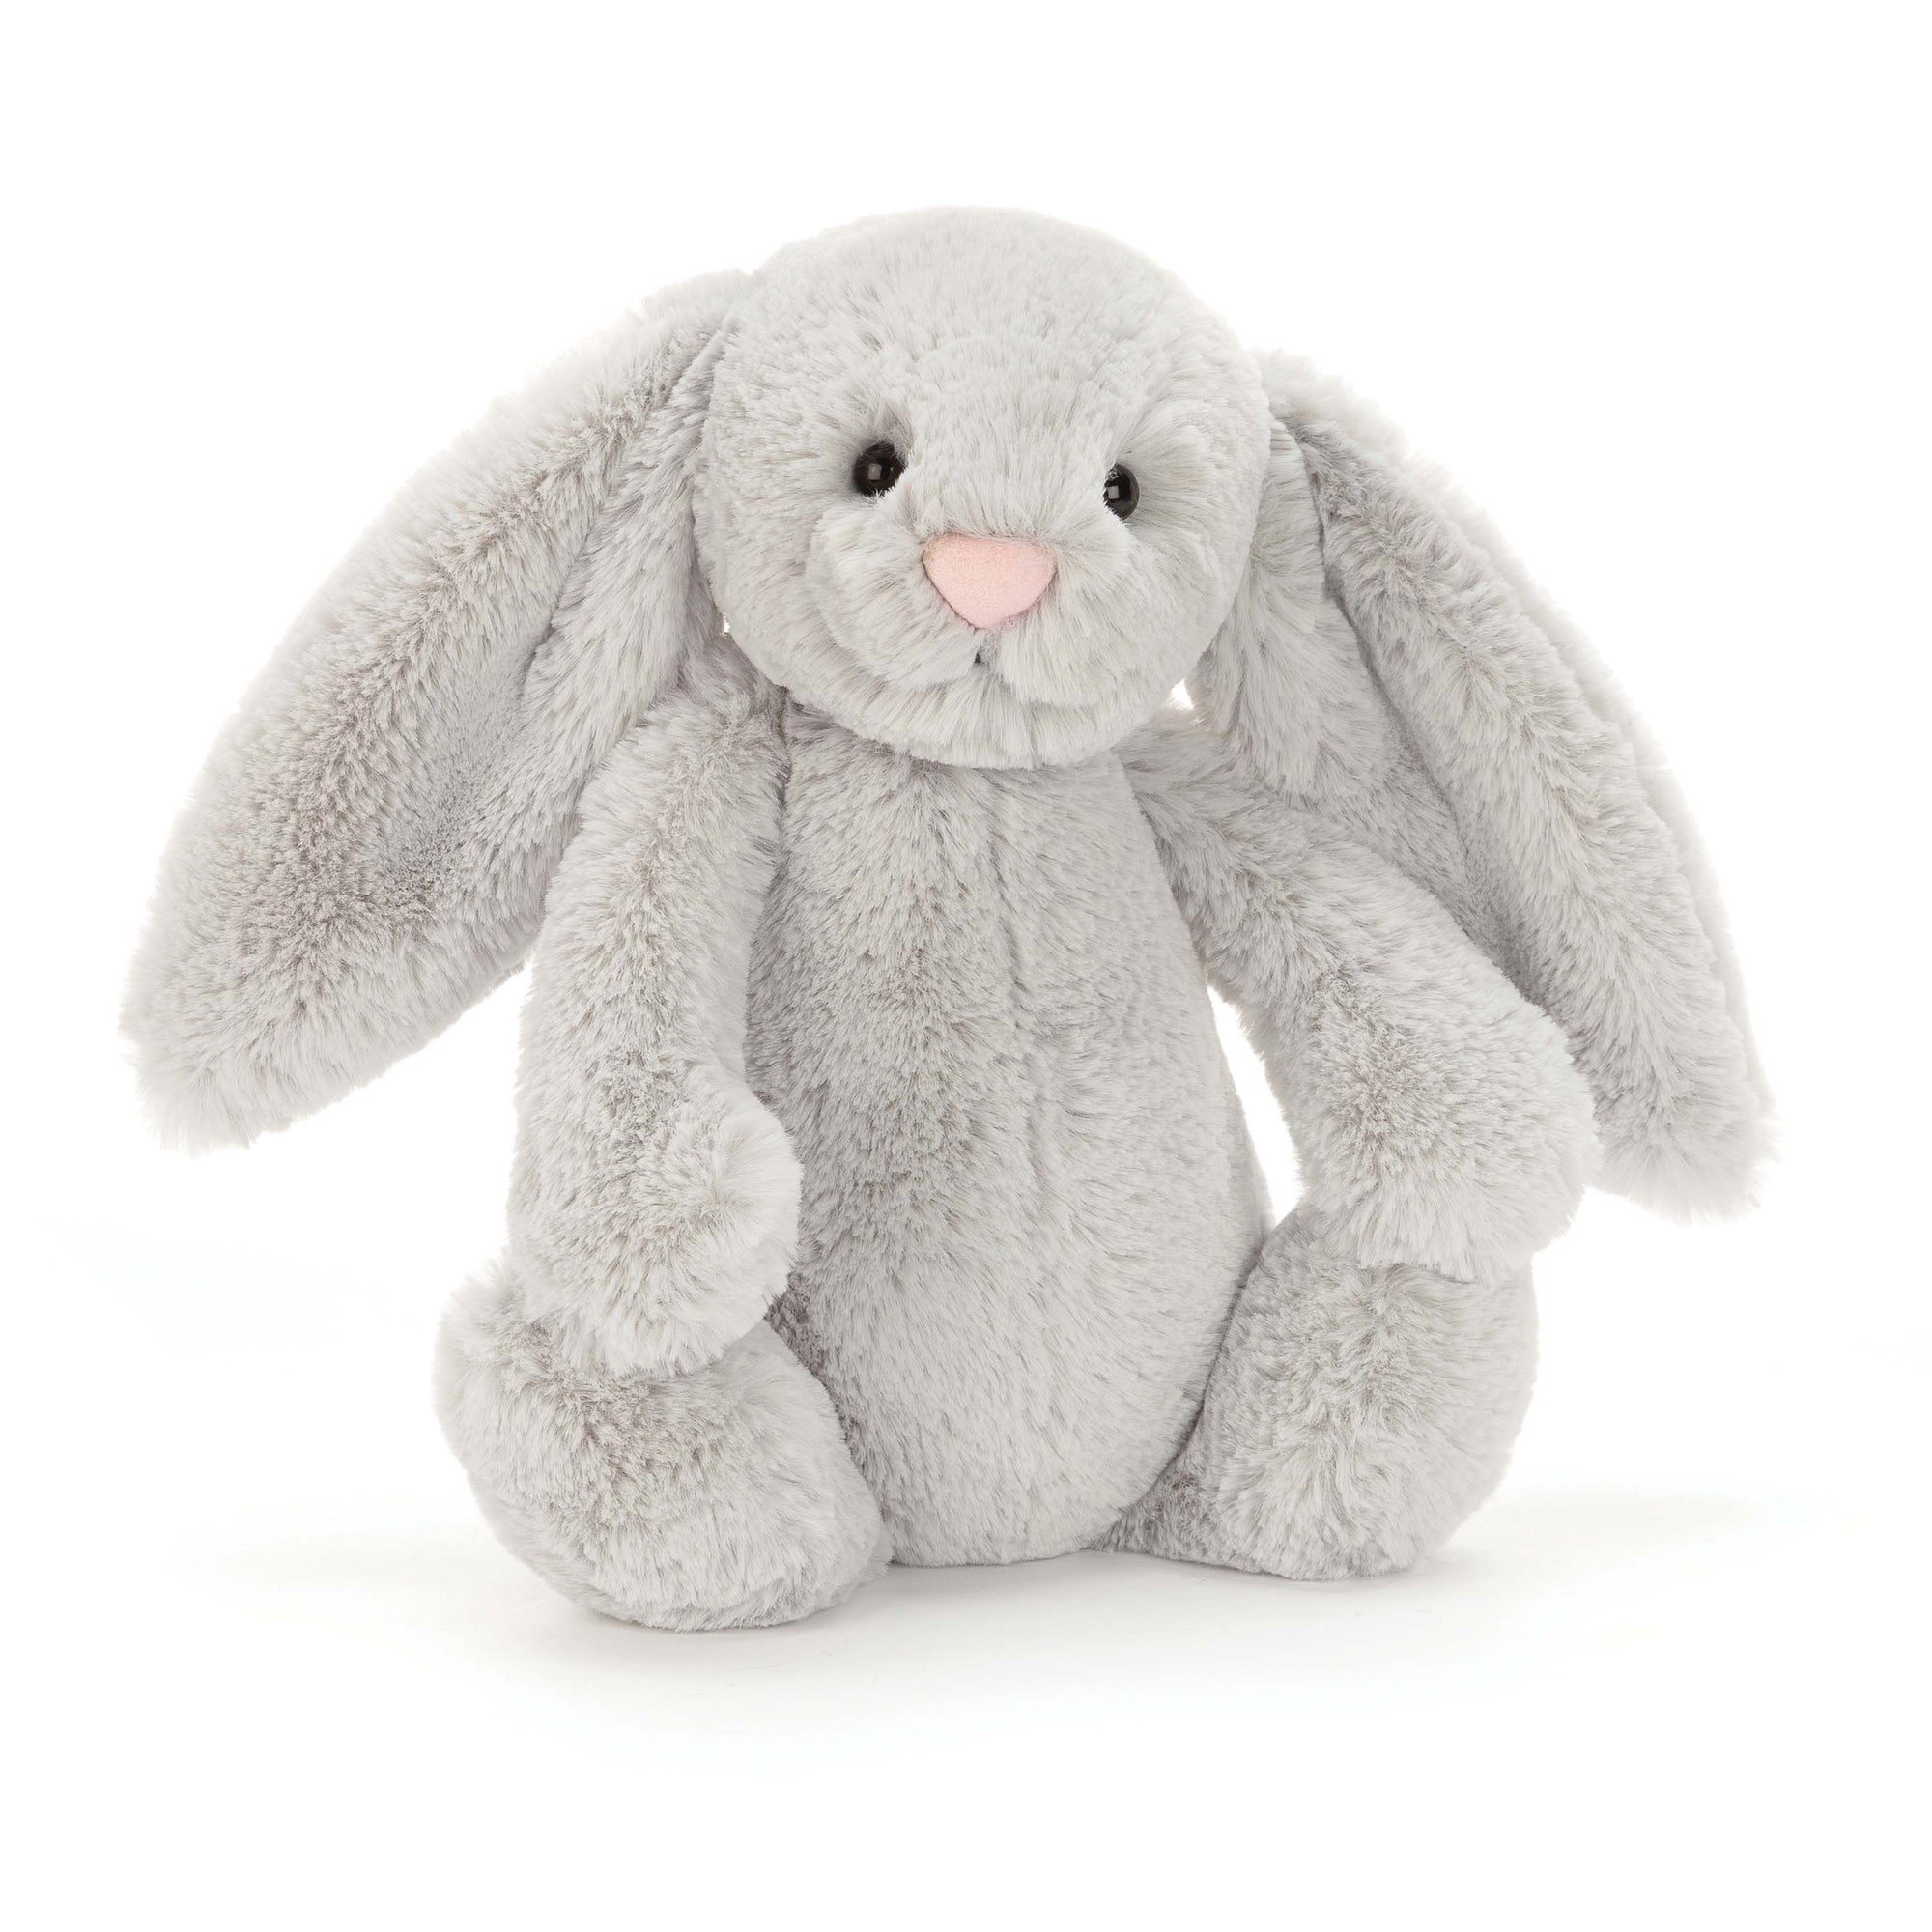 jellycat bunny - angus and dudley